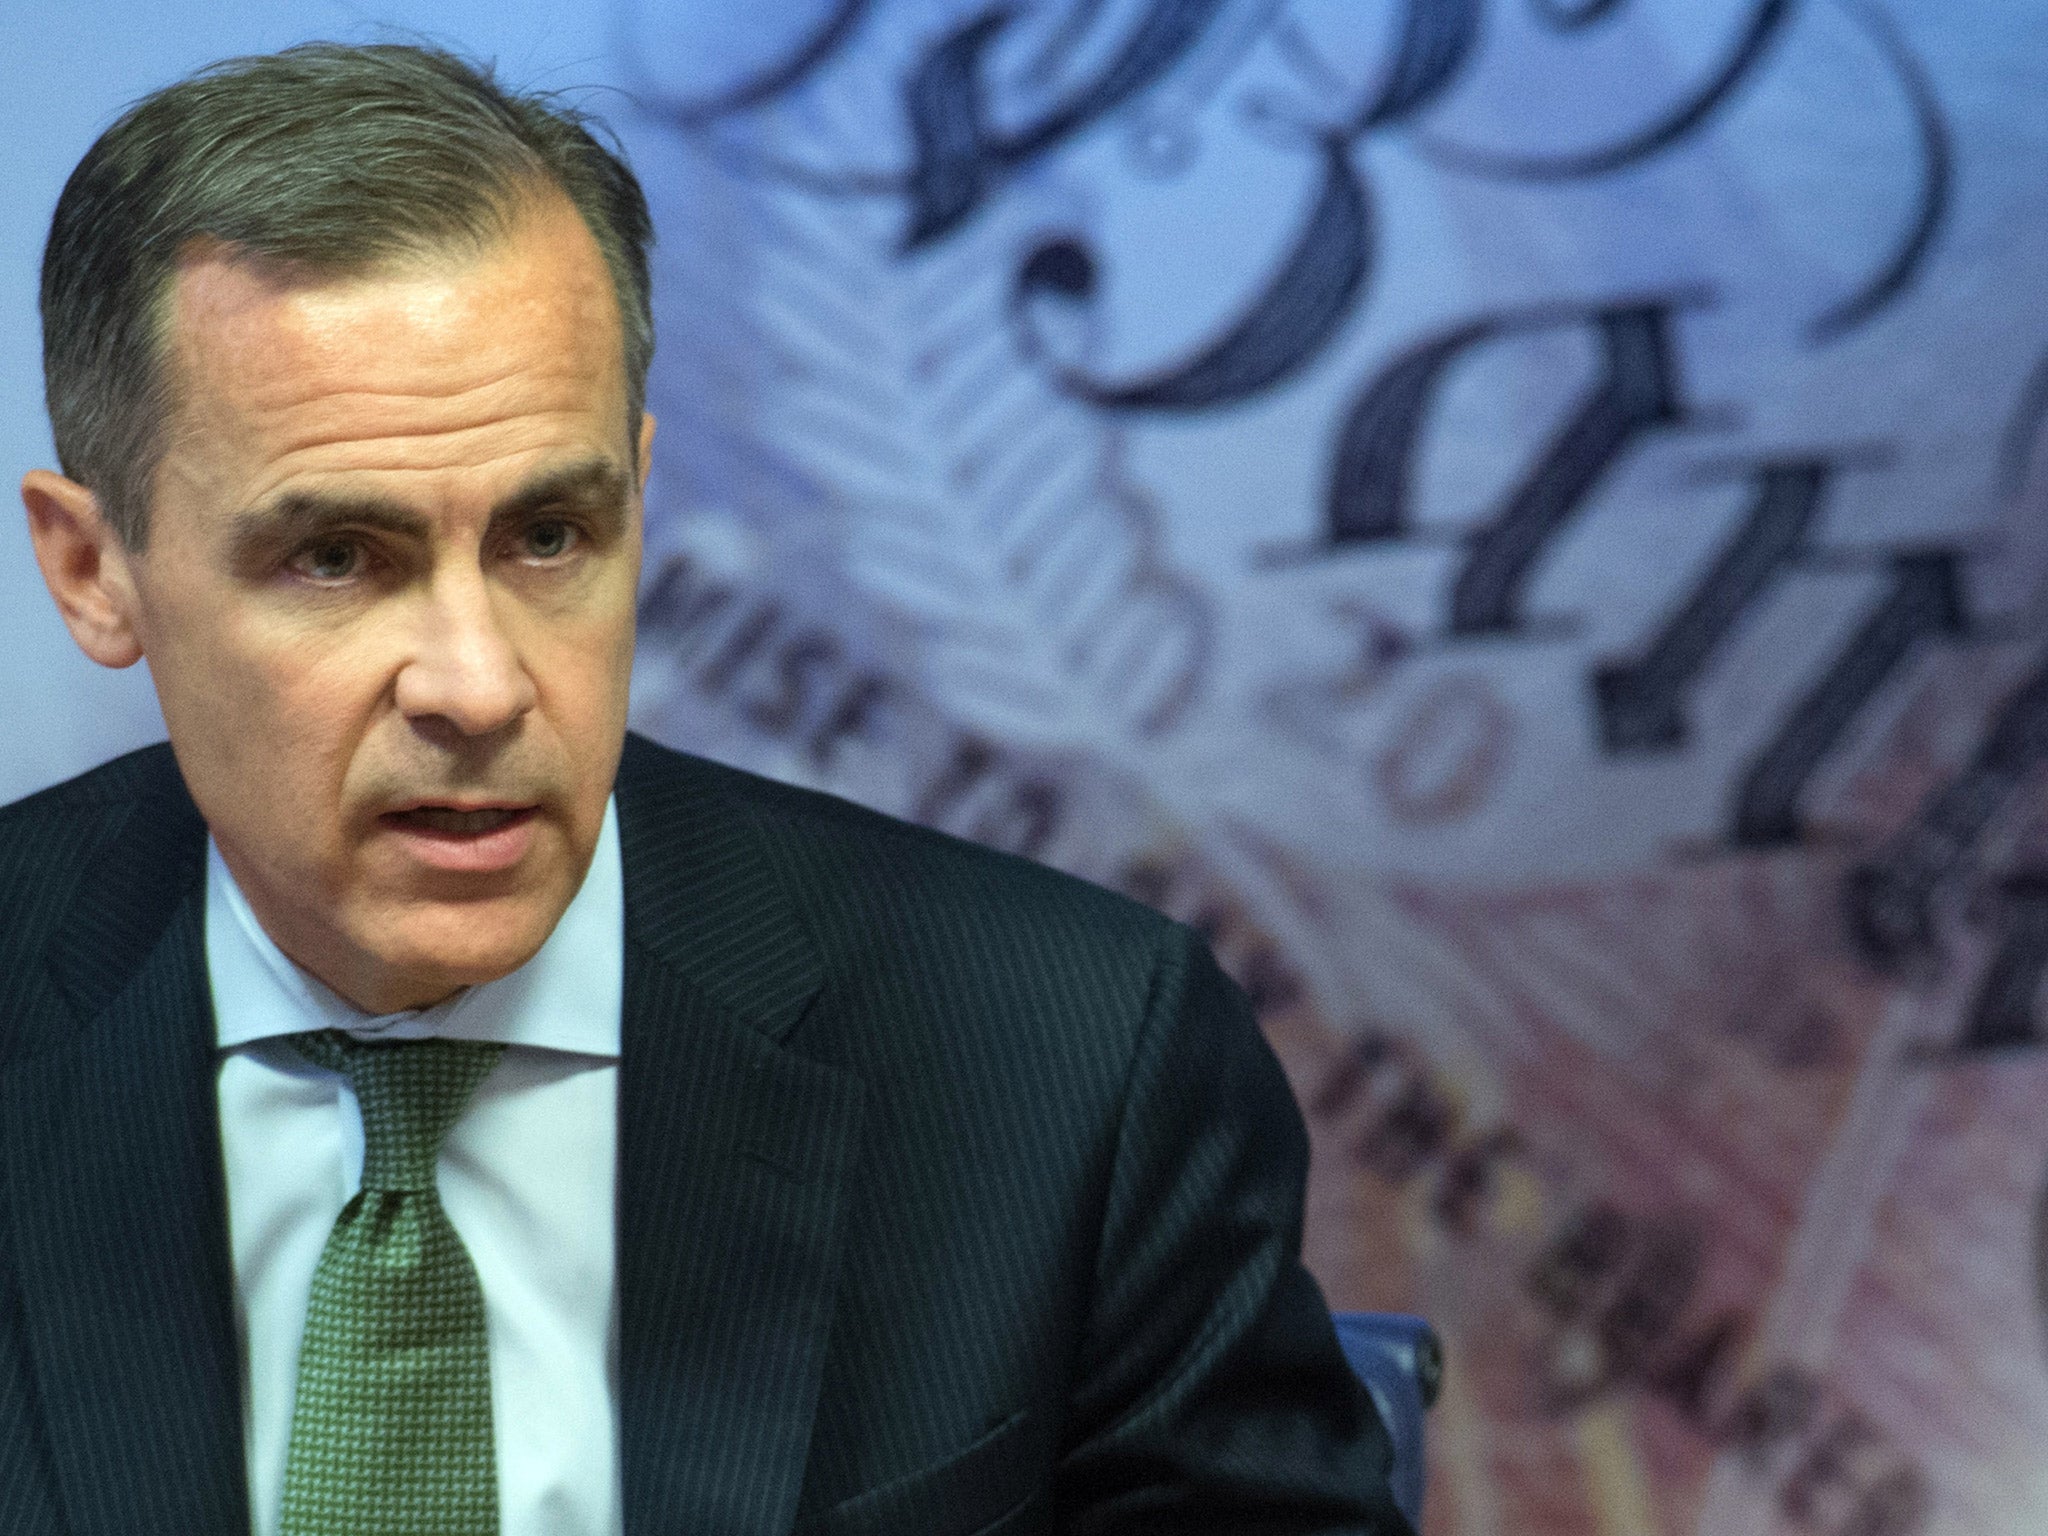 Inflation fell to the Bank of England's target of 2 per cent for the first time in over four years in December.